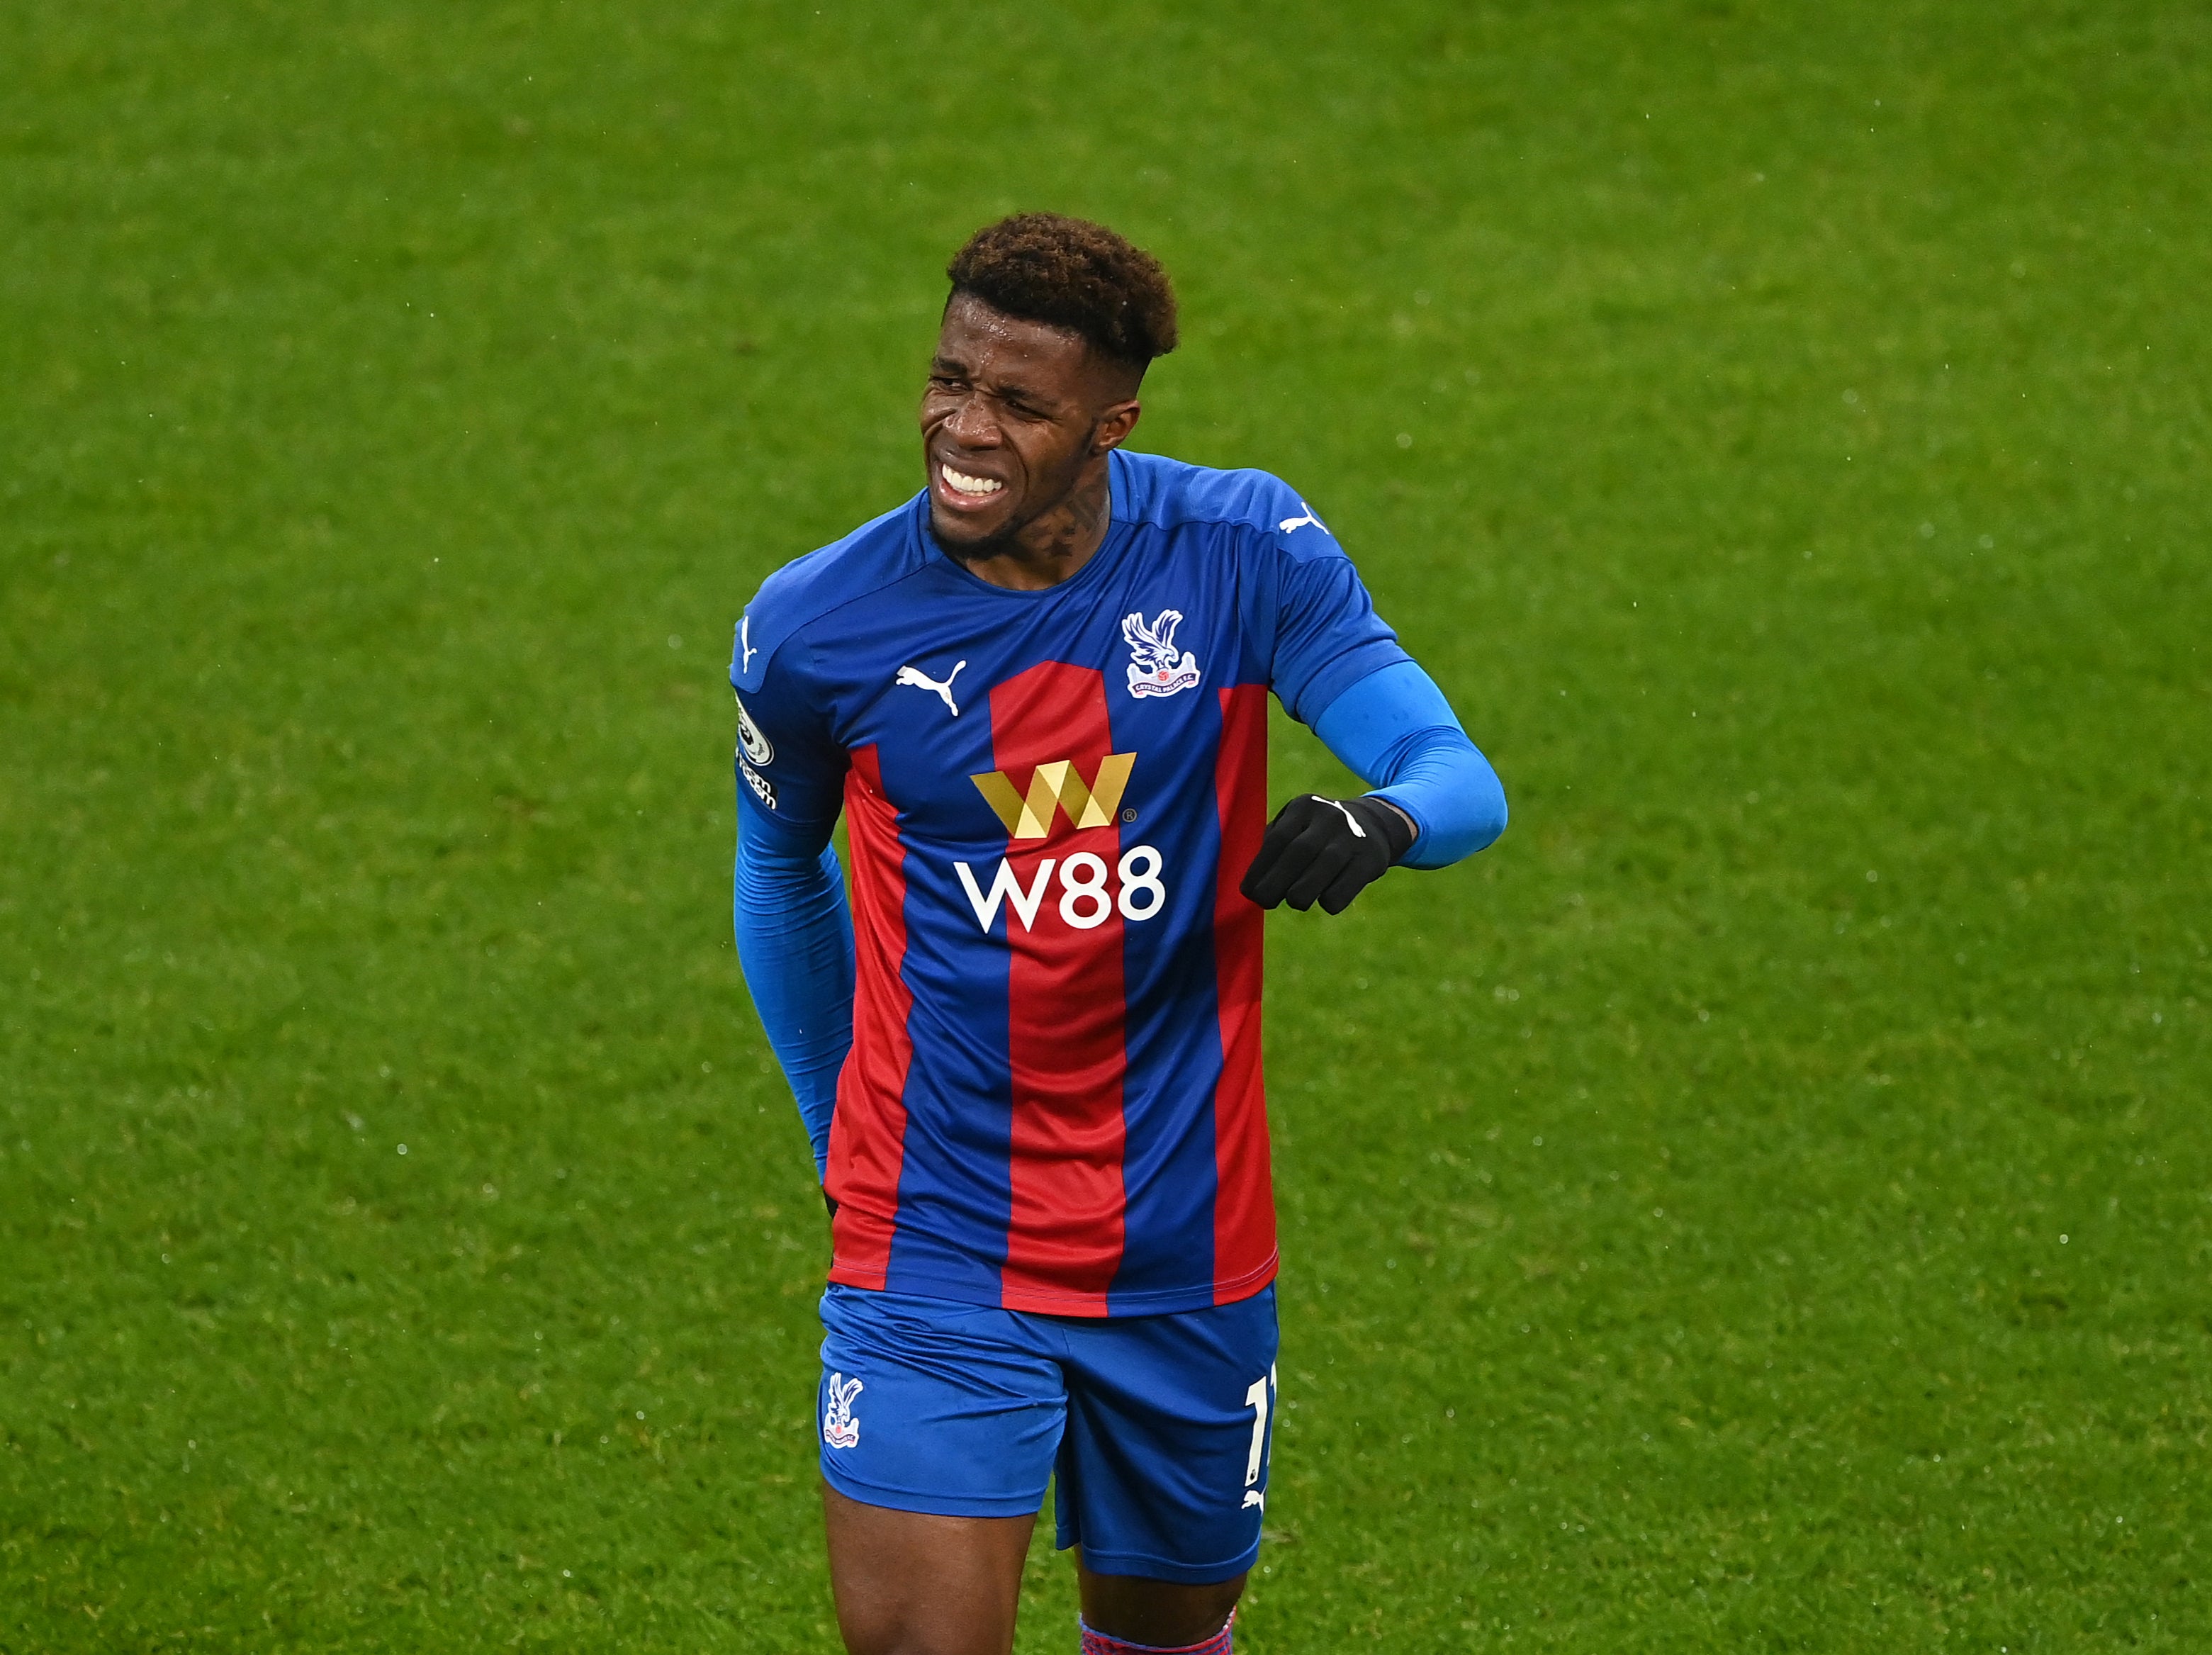 Crystal Palace winger Wilfried Zaha injured his hamstring on 2 February